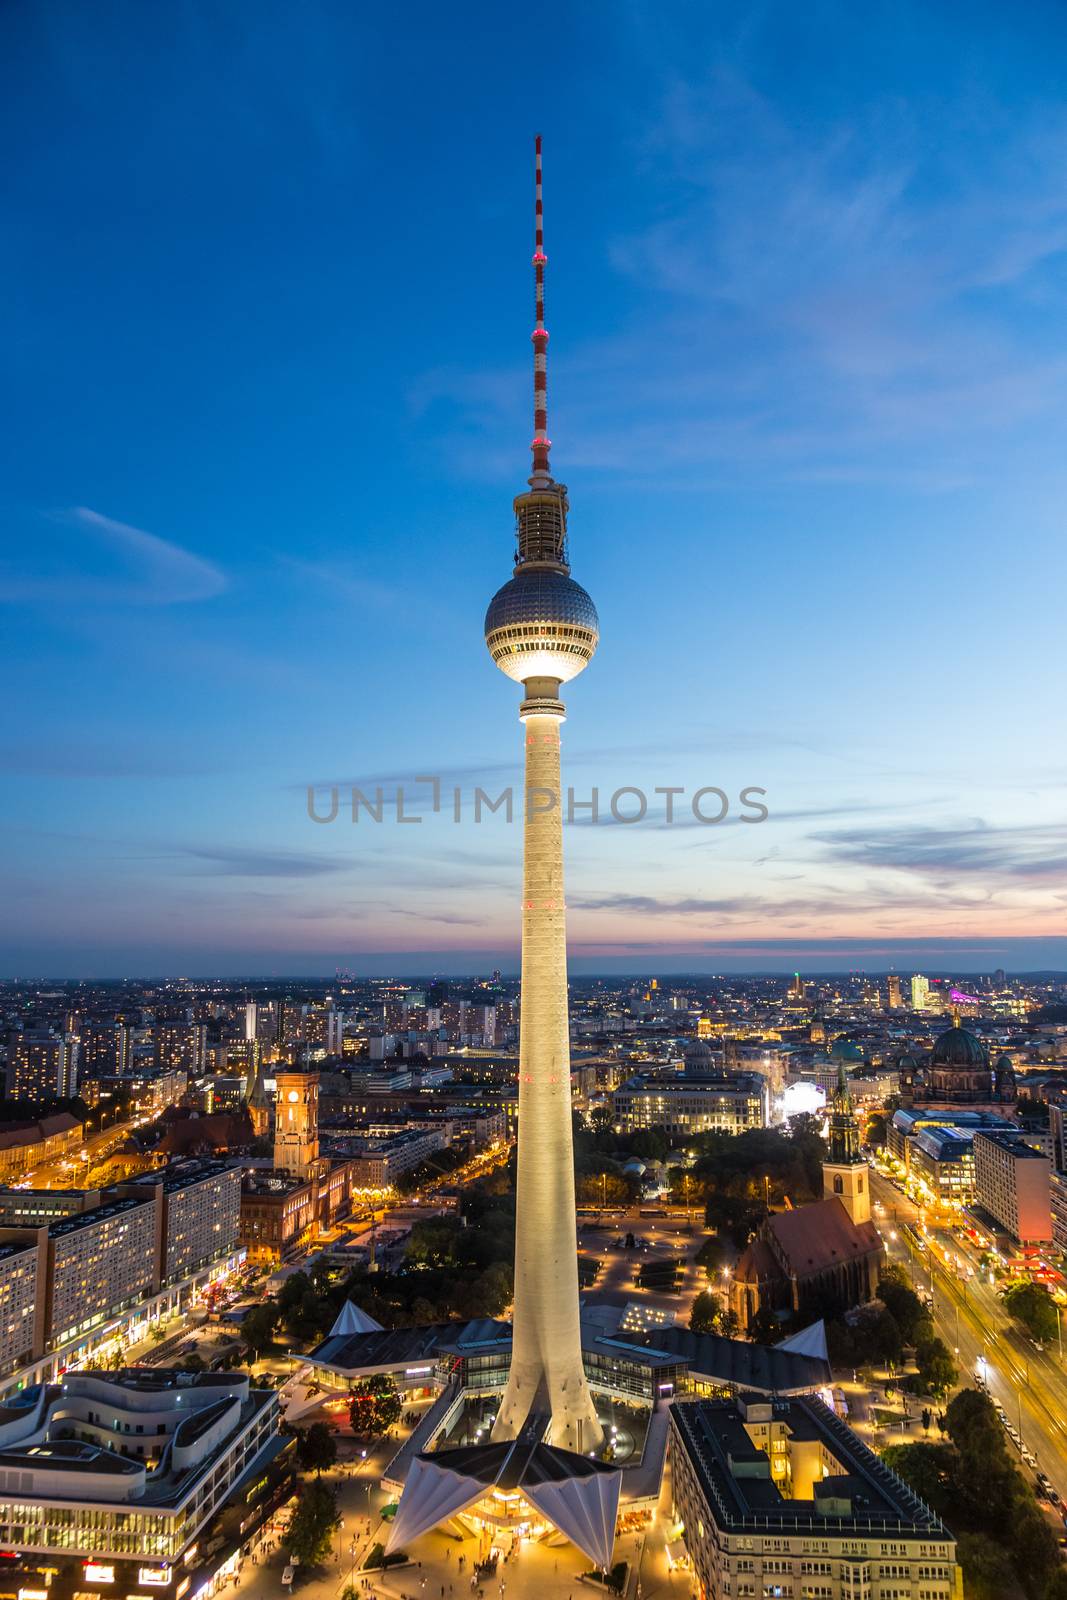 Panoramic view over Berlin at dusk from roof of the Hotel Park Inn Berlin.